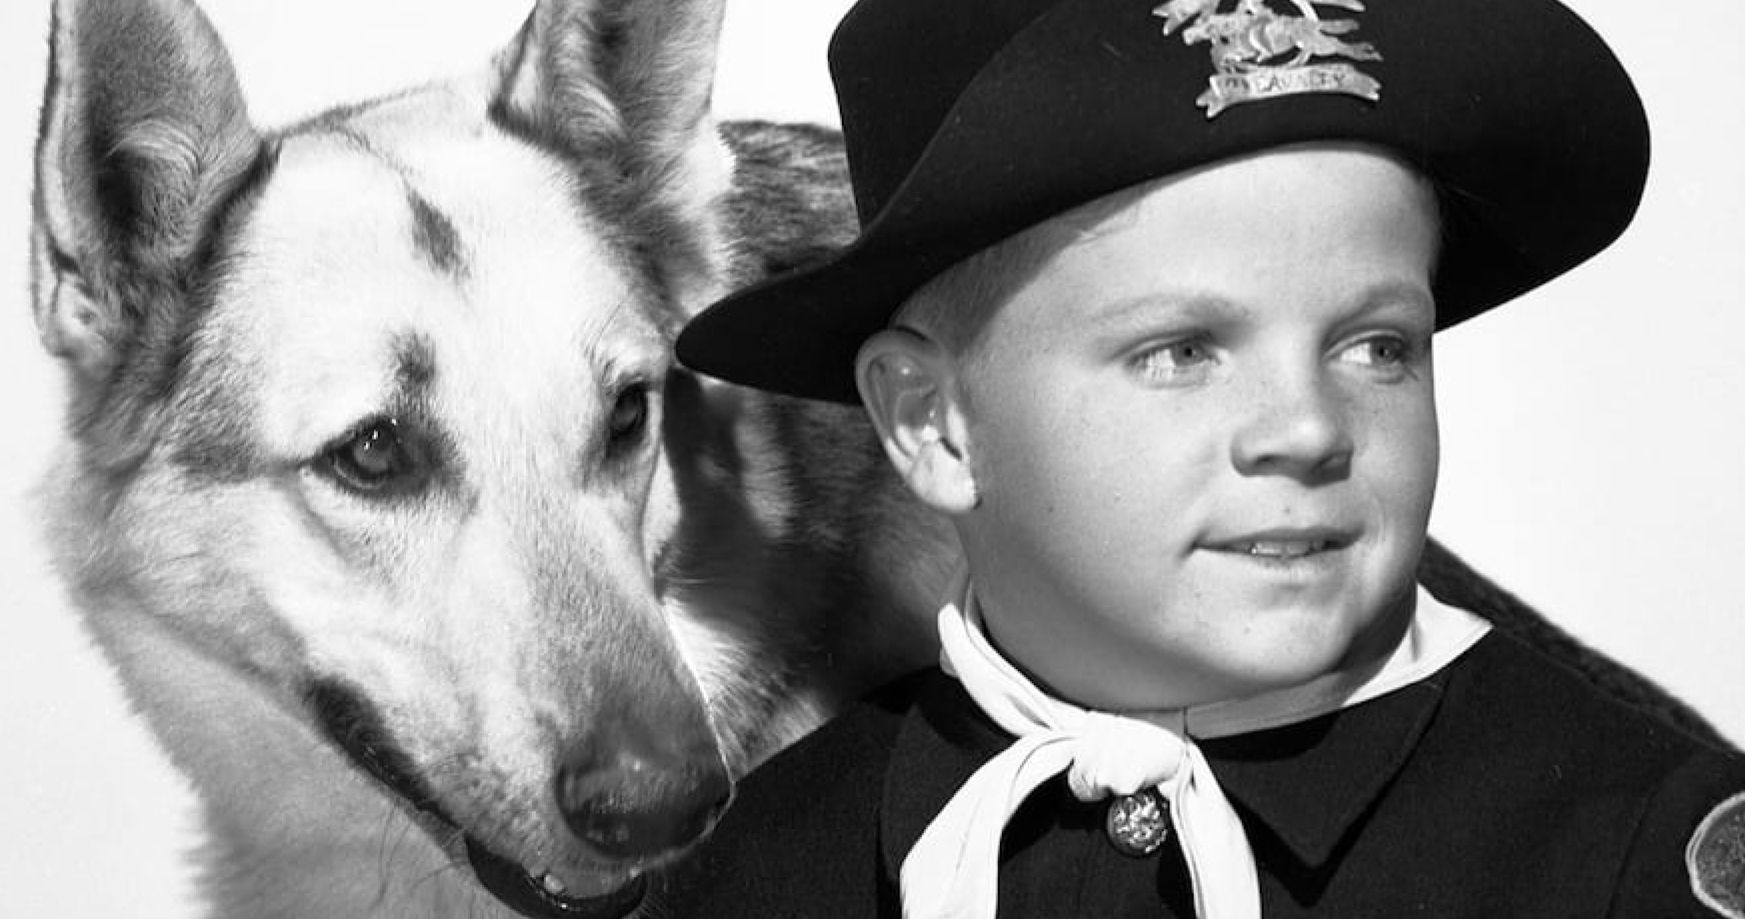 Lee Aaker Dies, The Adventures of Rin Tin Tin Star Was 77